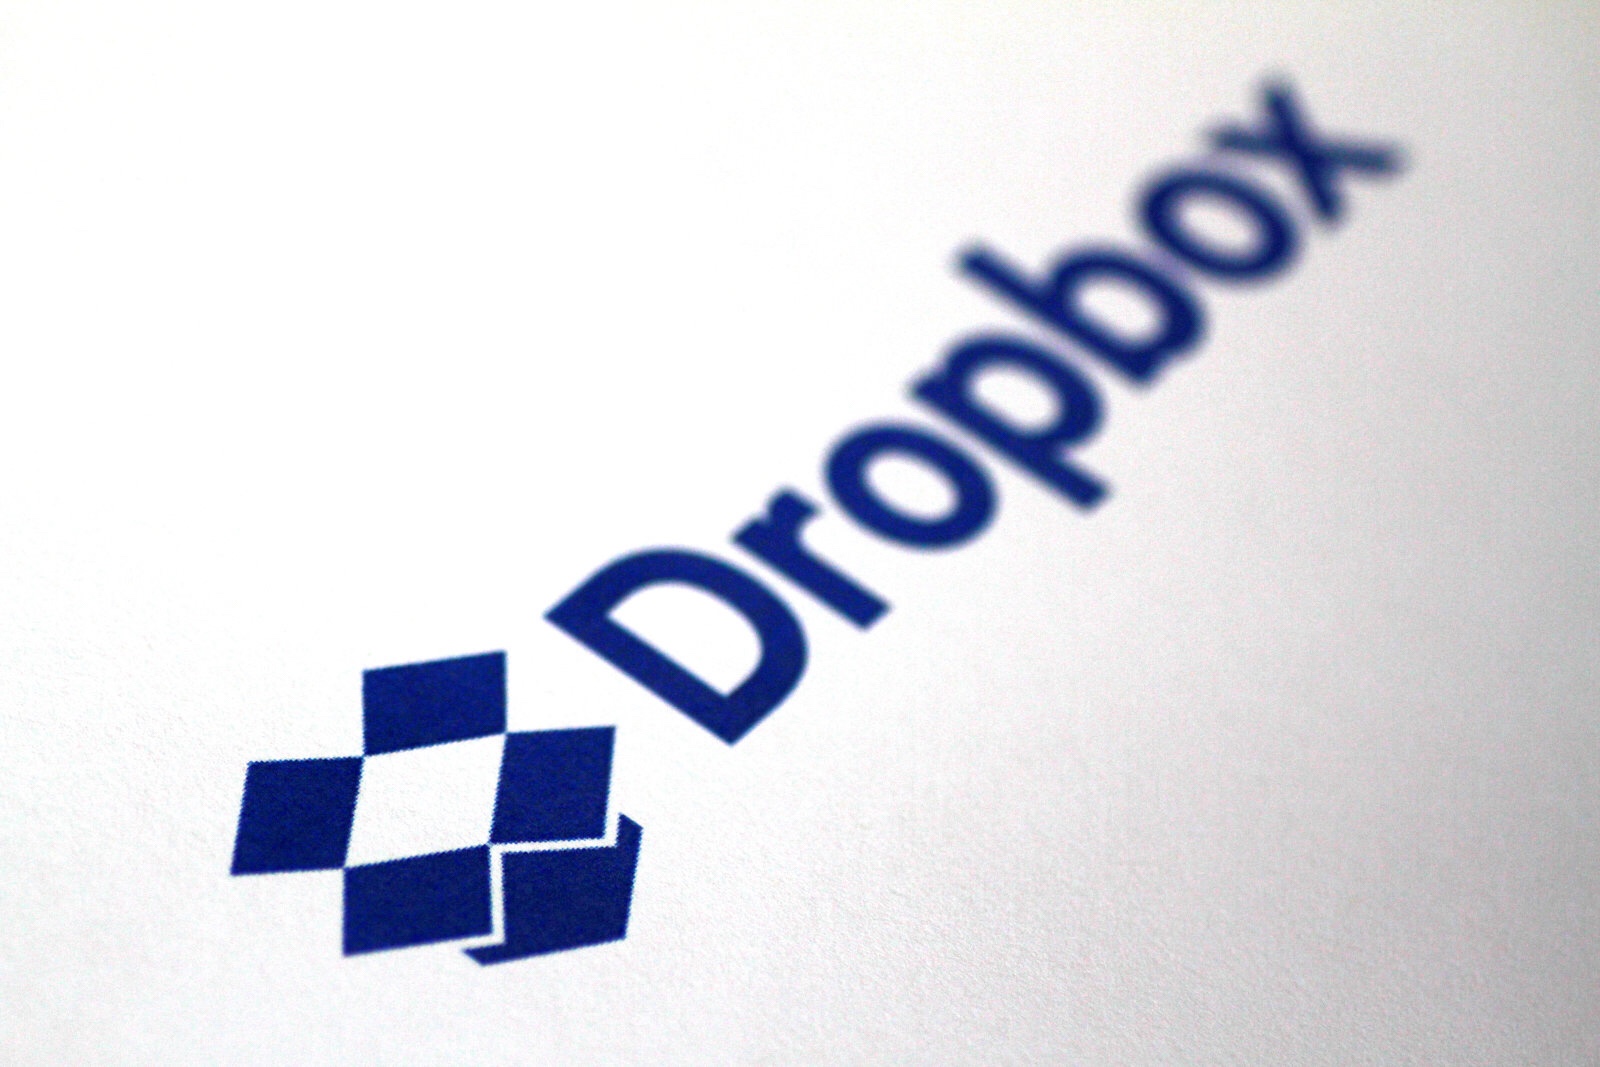 Dropbox’s IPO filing has emerged with interesting details